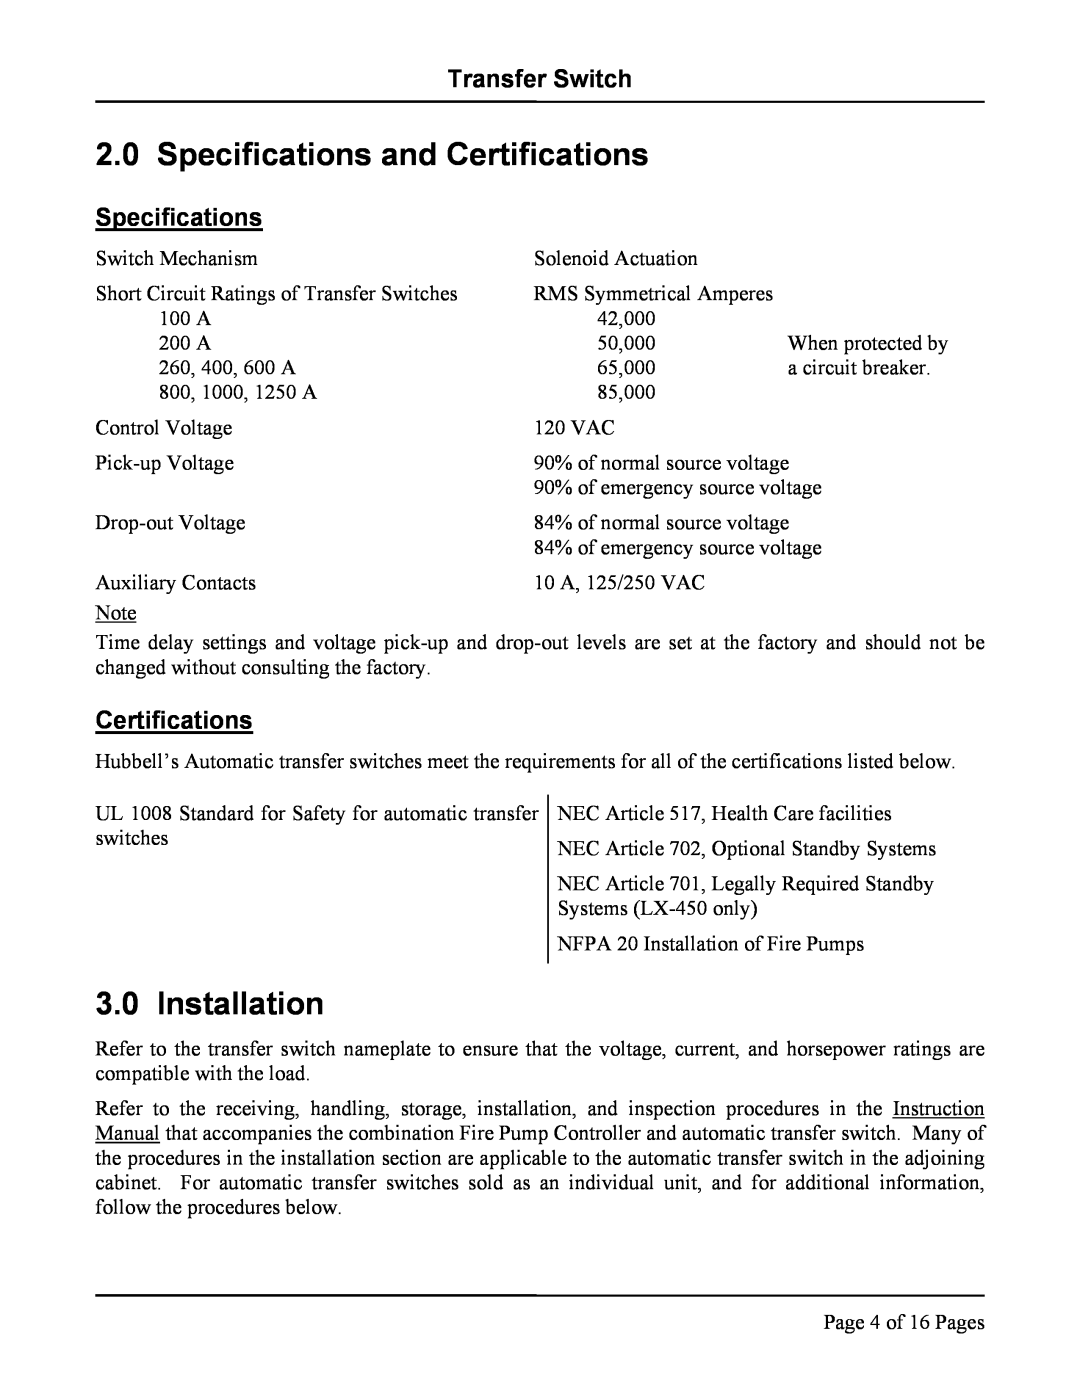 Hubbell LX-440, LX-450 instruction manual Specifications and Certifications, Installation, Transfer Switch 